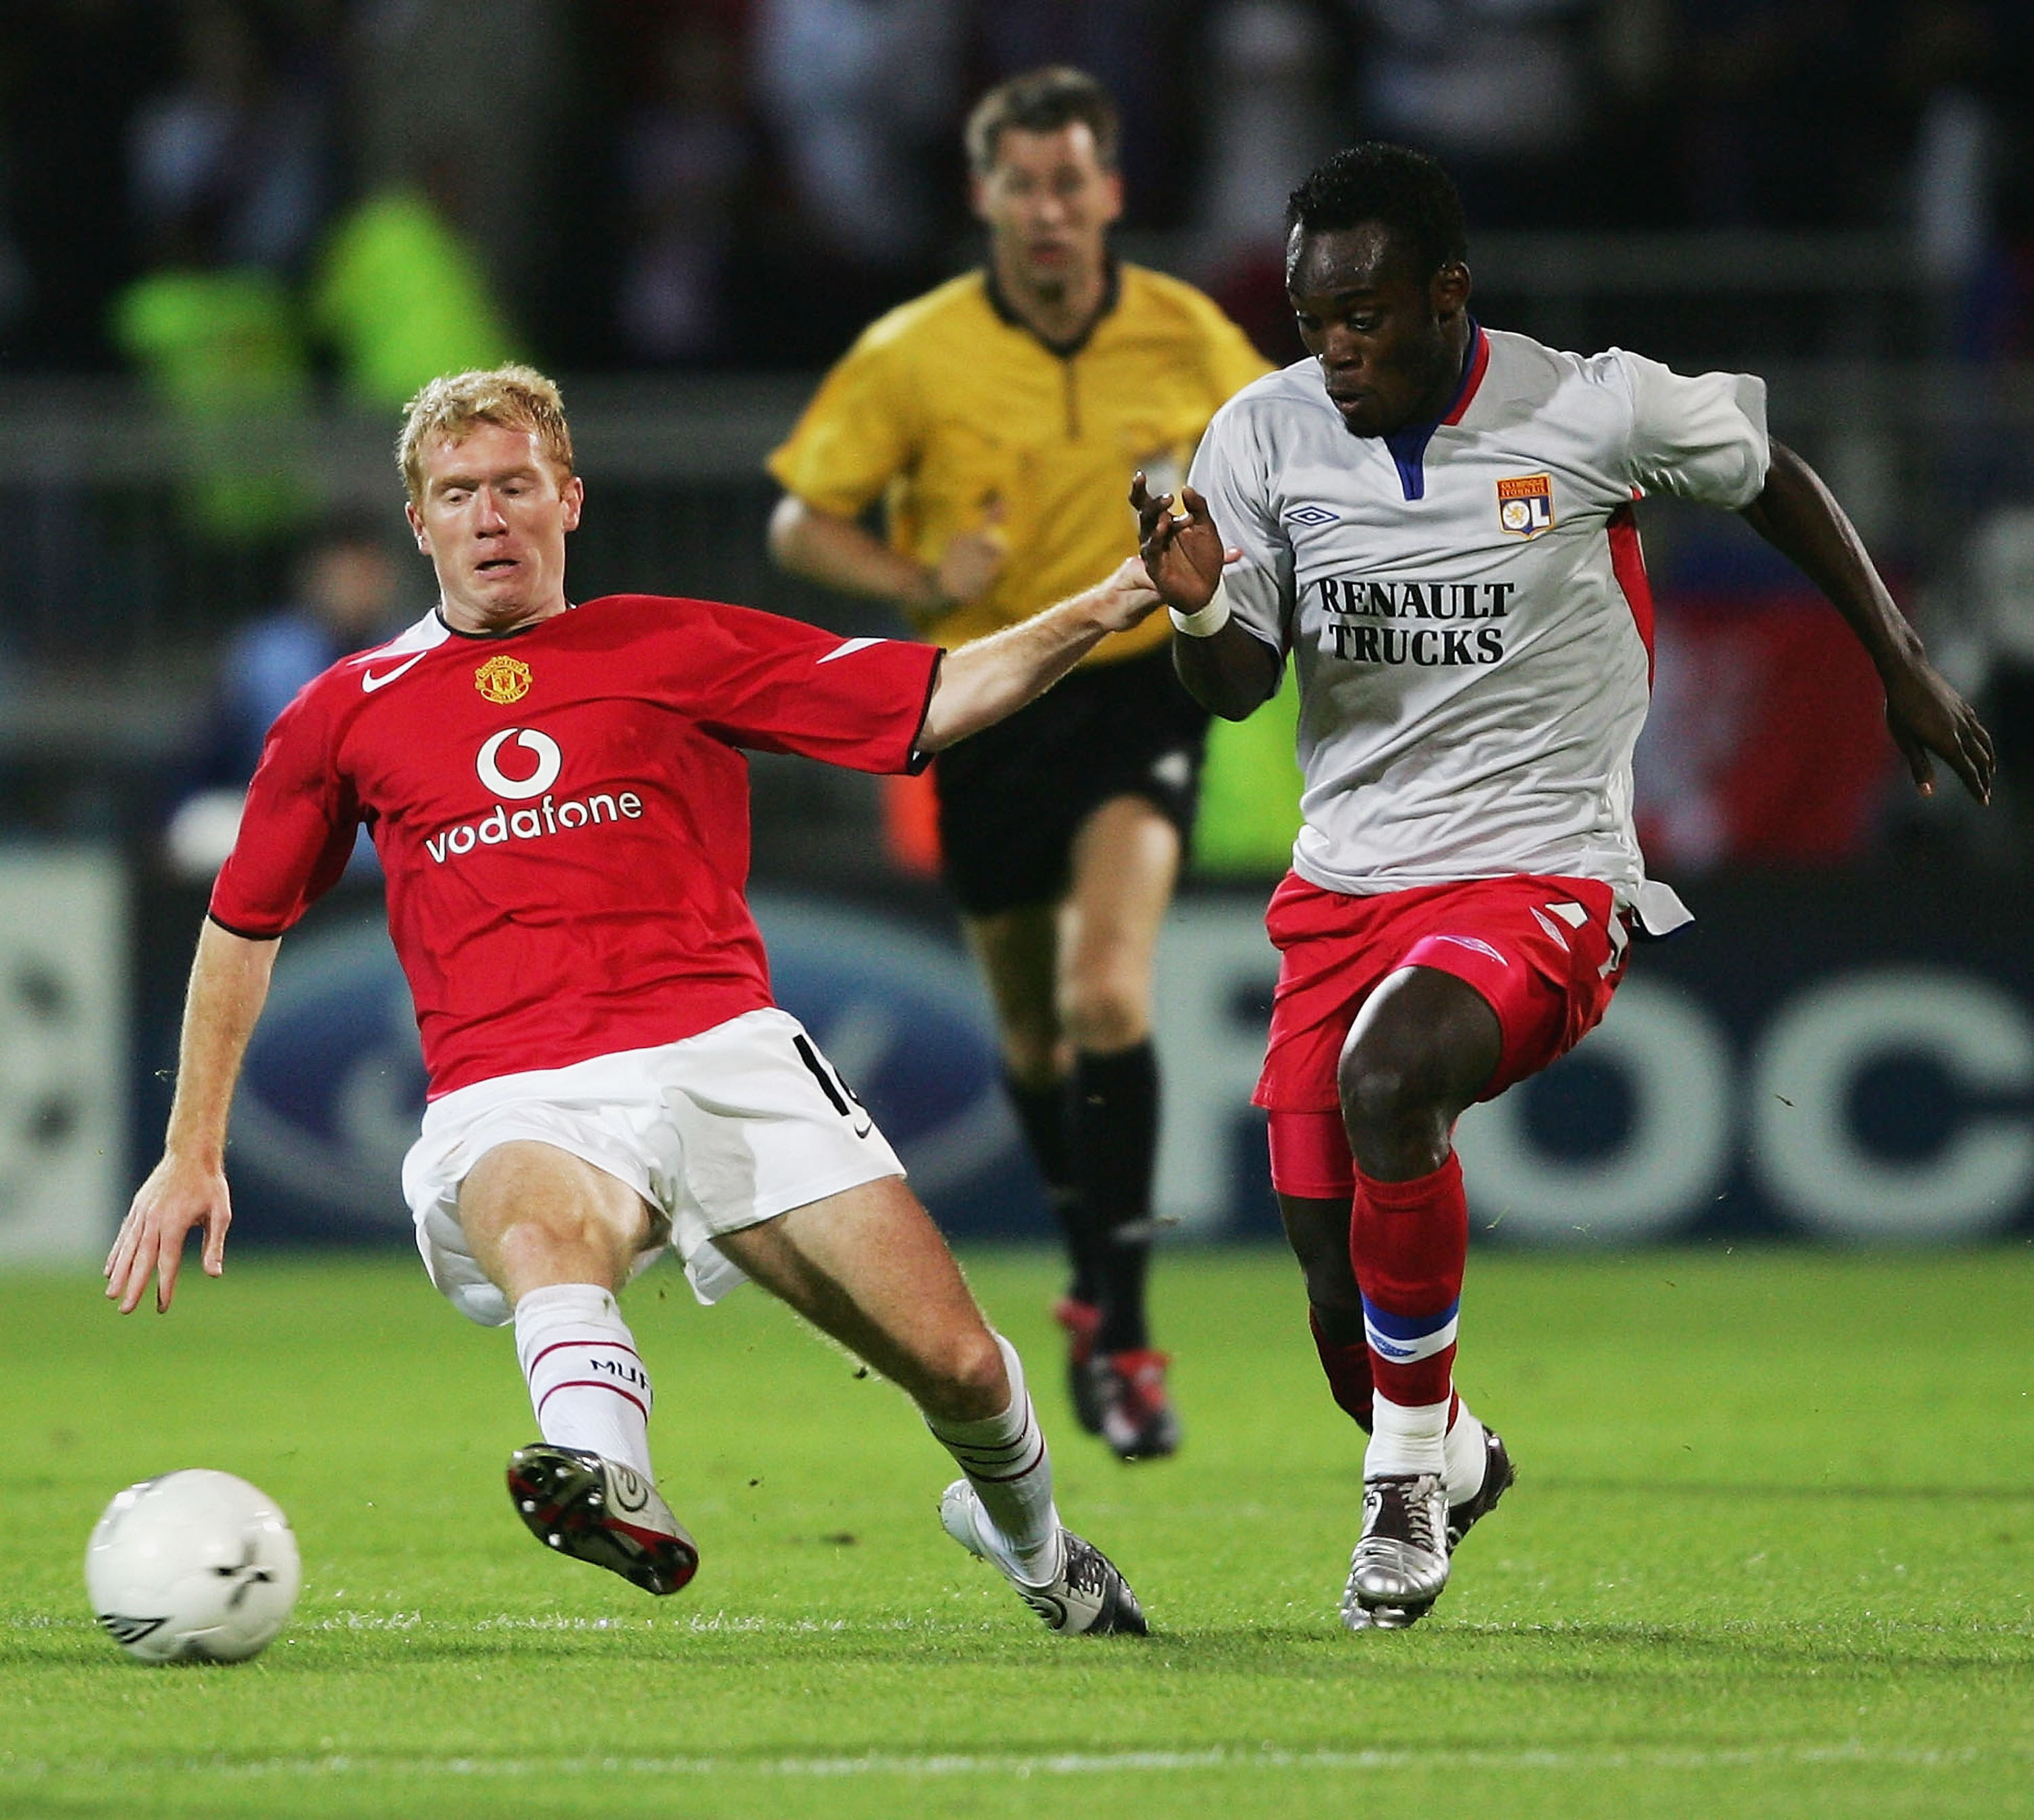 LYON, FRANCE - SEPTEMBER 15:  Paul Scholes of Manchester United battles with Mickael Essien of Lyon during the UEFA Champions League Group D match between Olympique Lyonnais and Manchester United at the Municipal de Garland Stadium on September 15, 2004 i